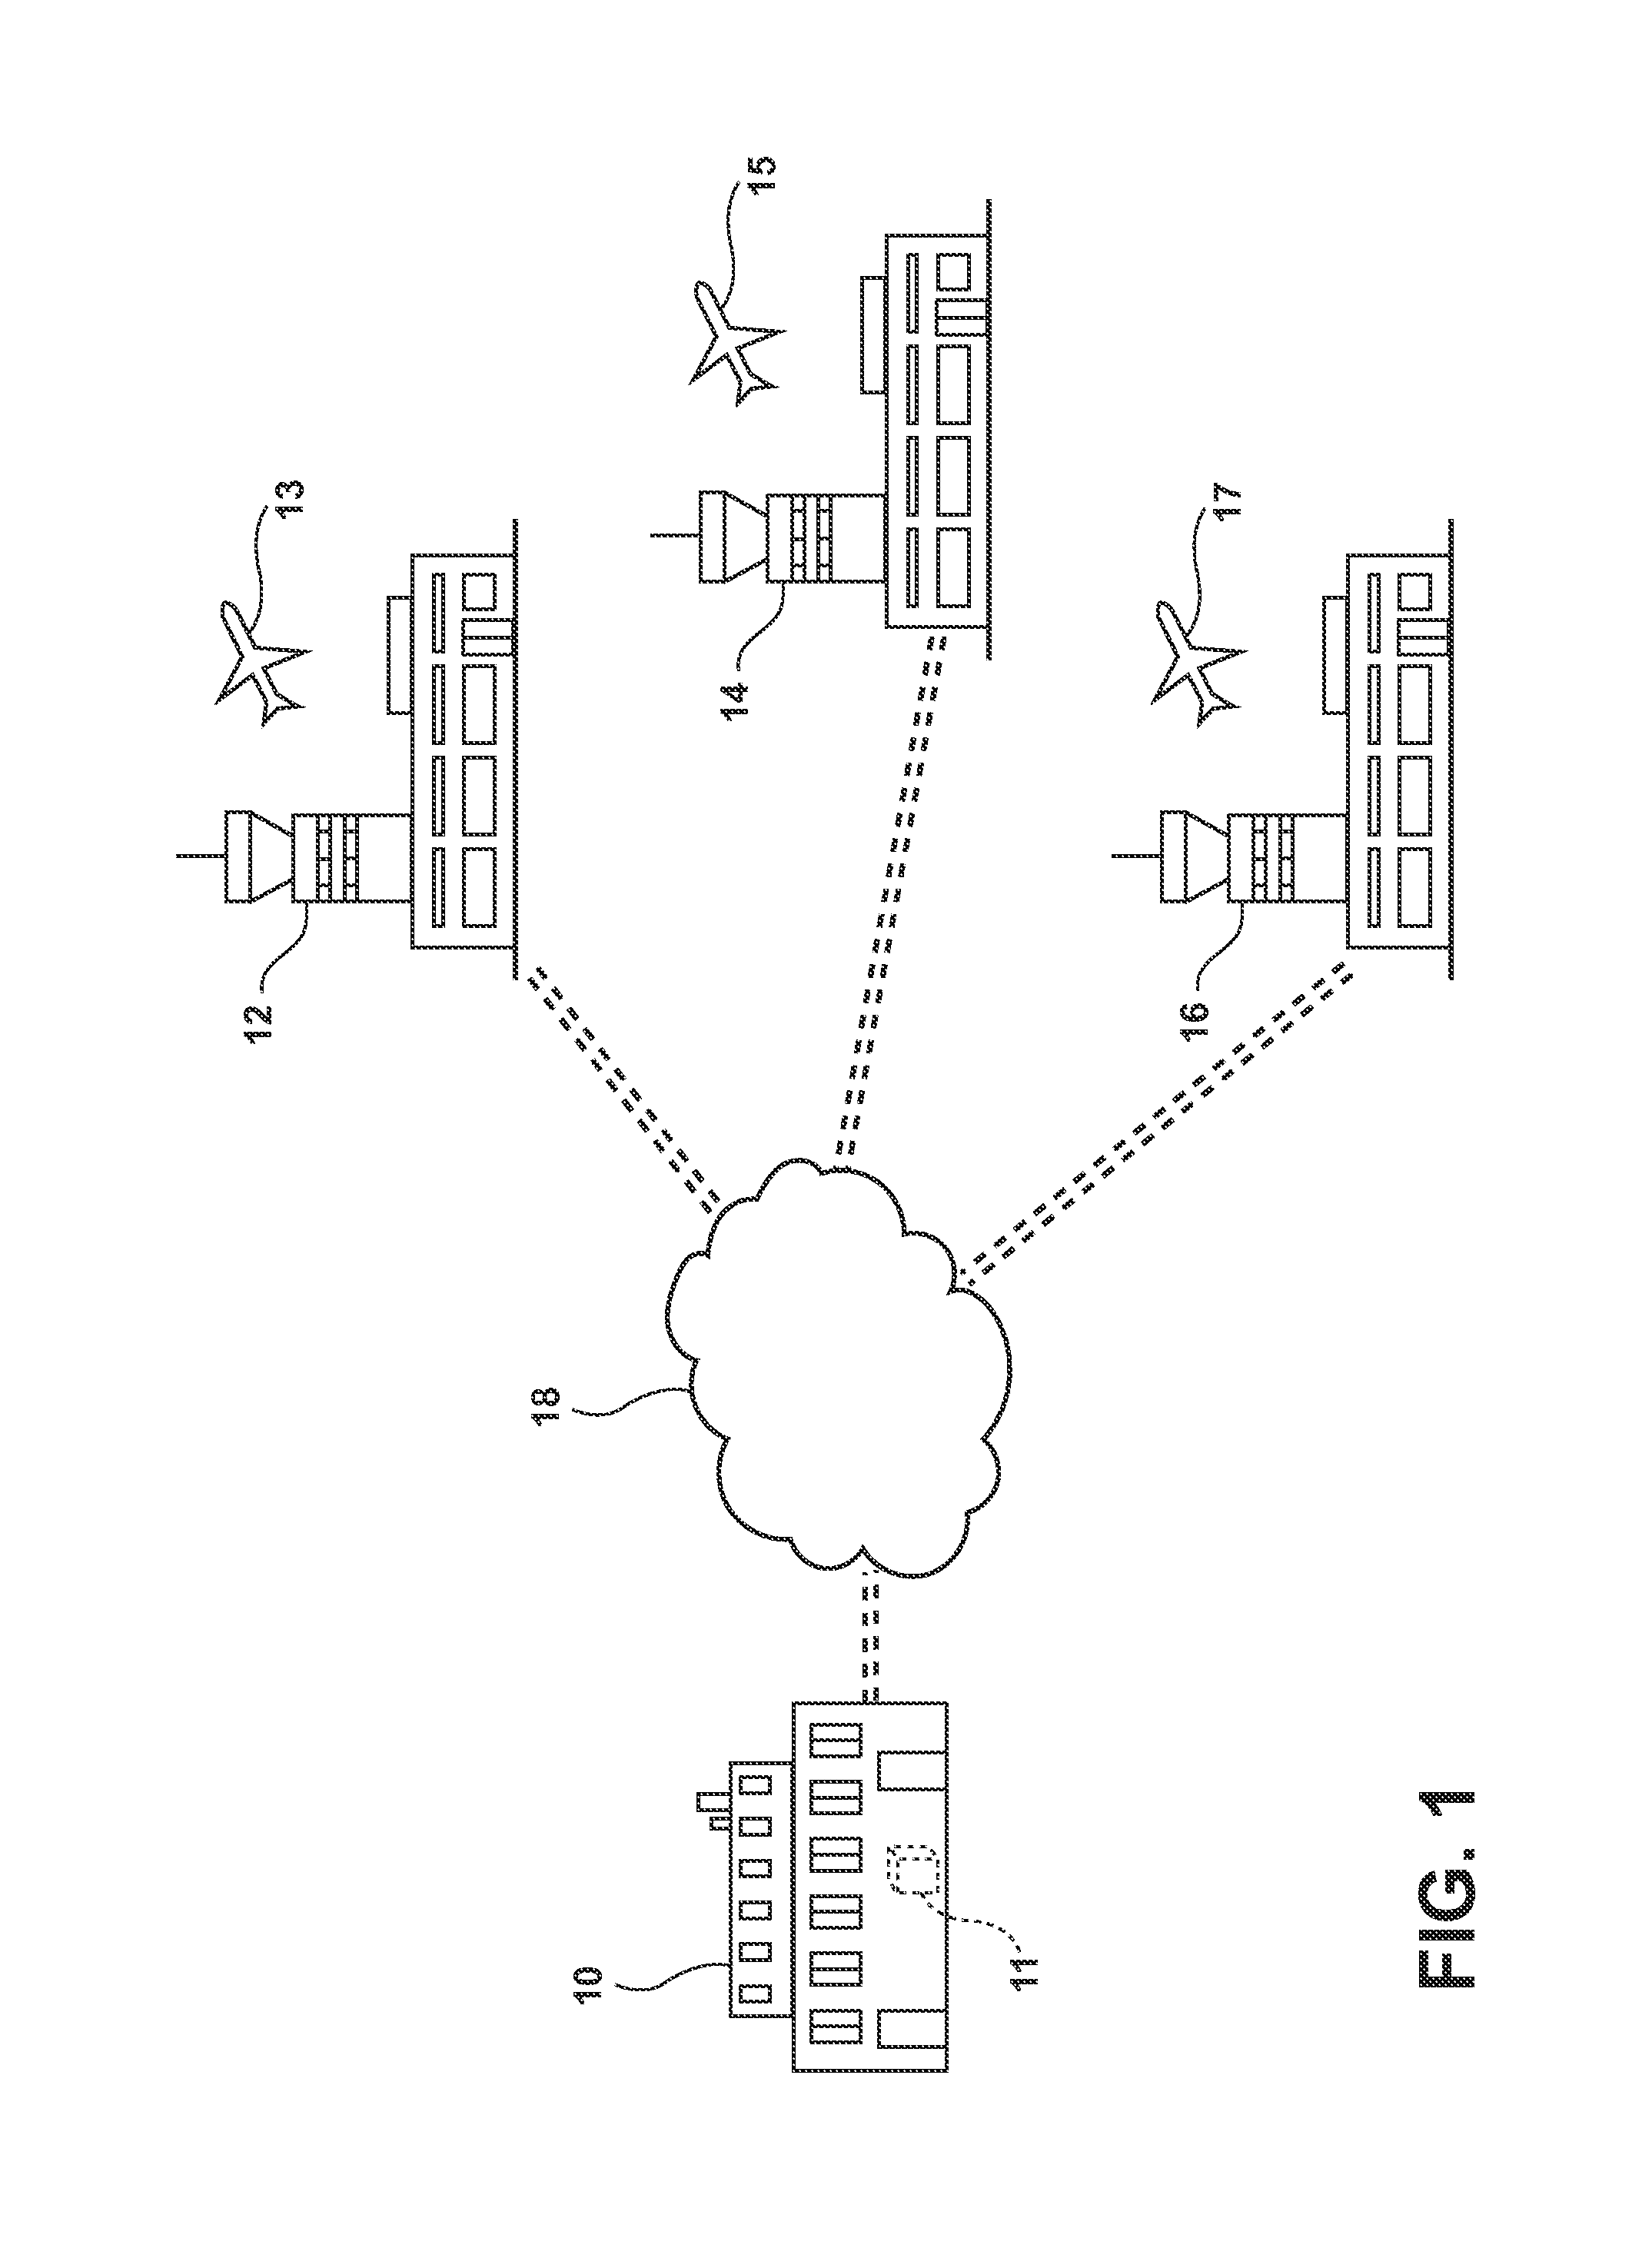 Method for rescheduling flights affected by a disruption and an airline operations control system and controller